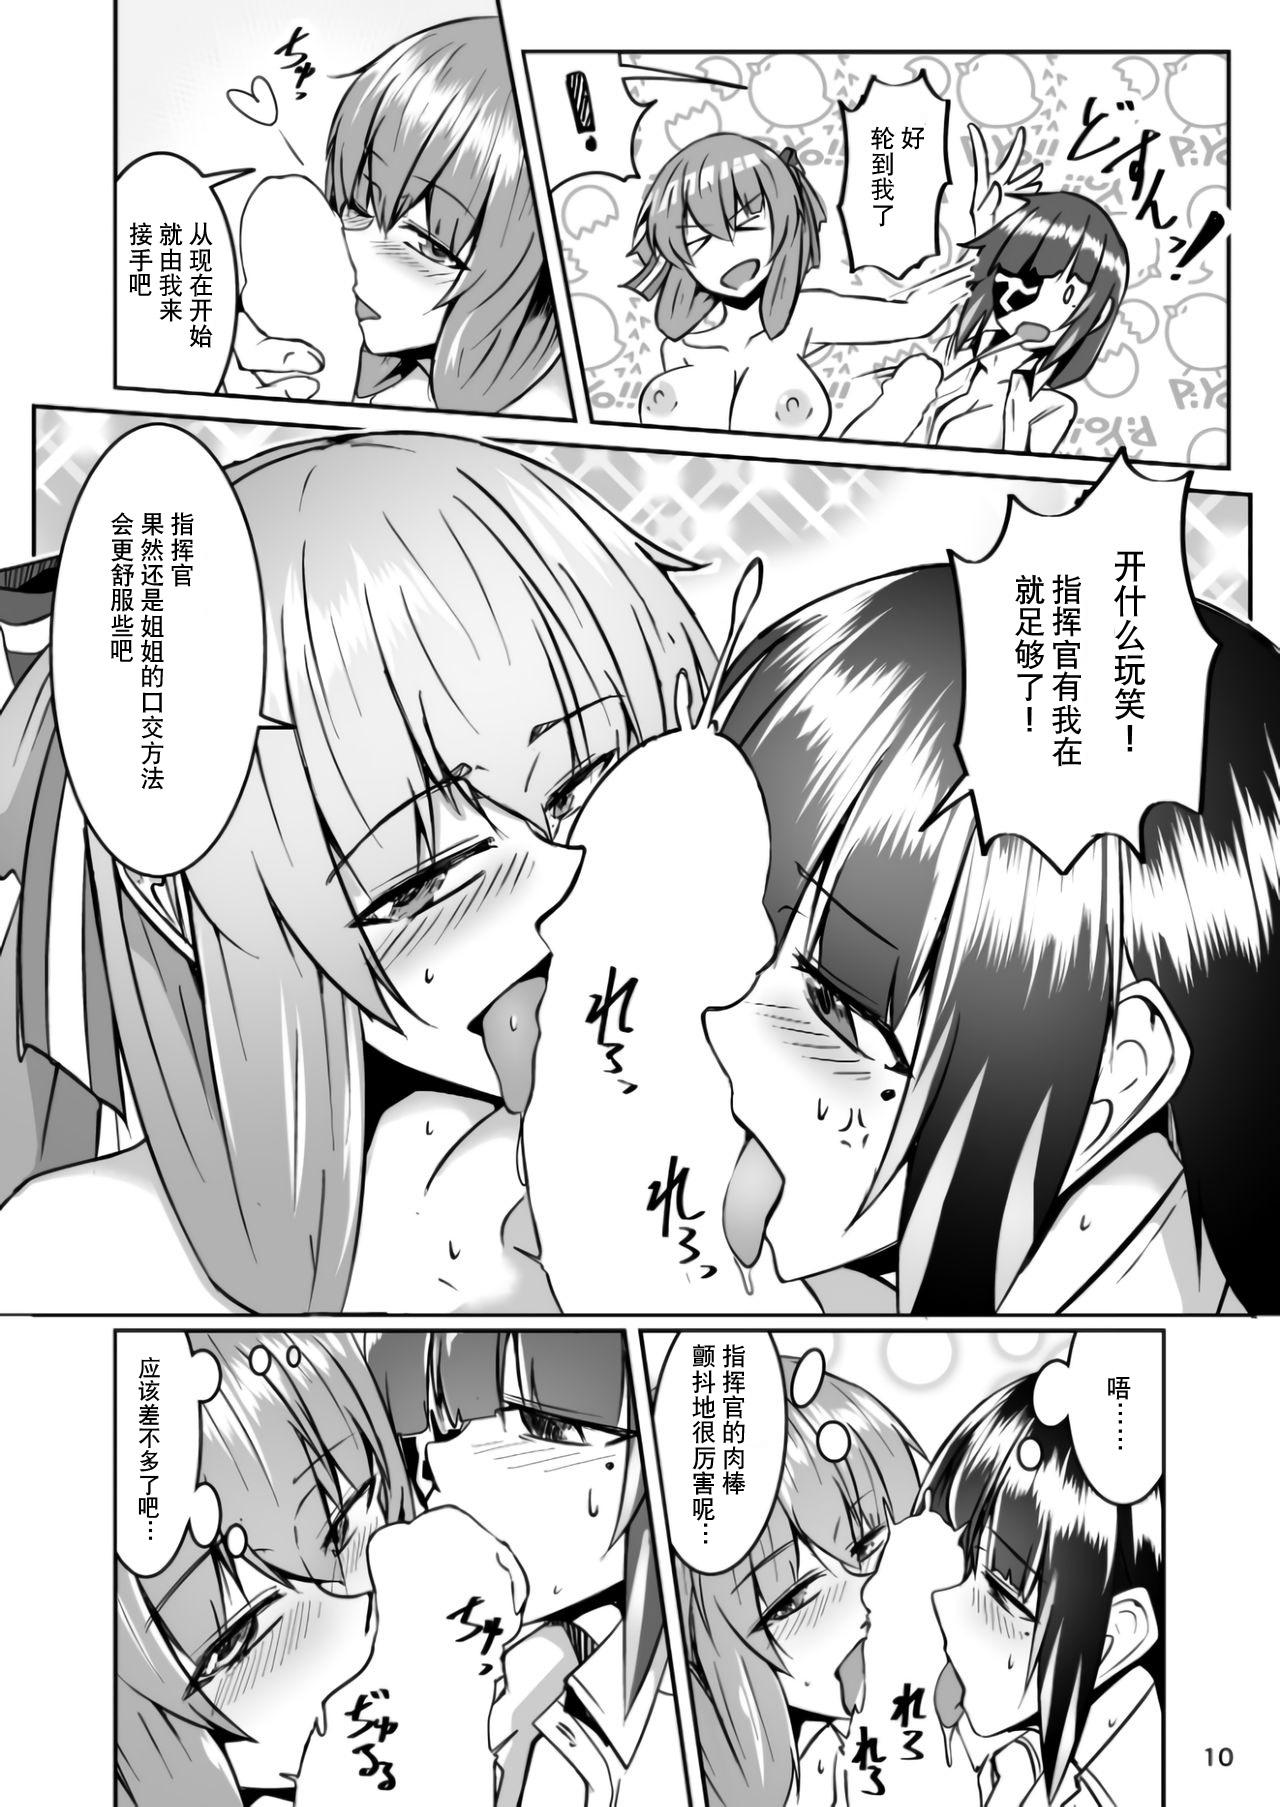 Foreplay Happy New Year! Shikikan-sama! Springfield & M16A1 - Girls frontline Sex Party - Page 10